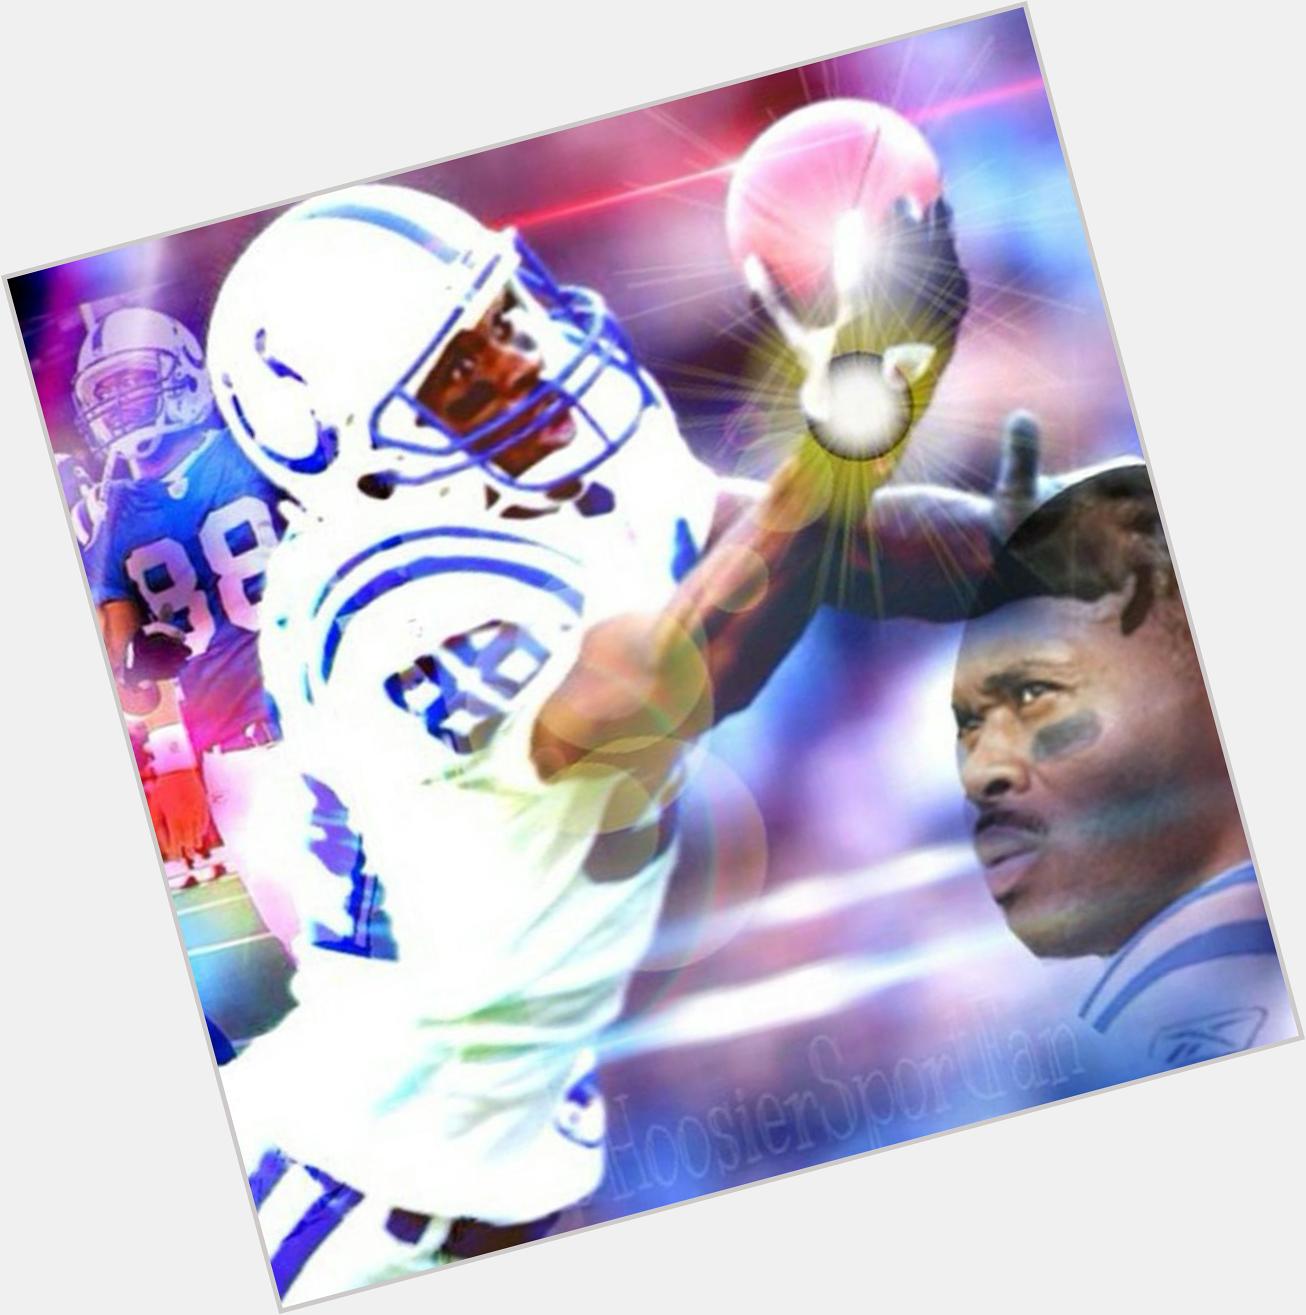 Also happy birthday to the greatest Colts receiver, Marvin Harrison!  